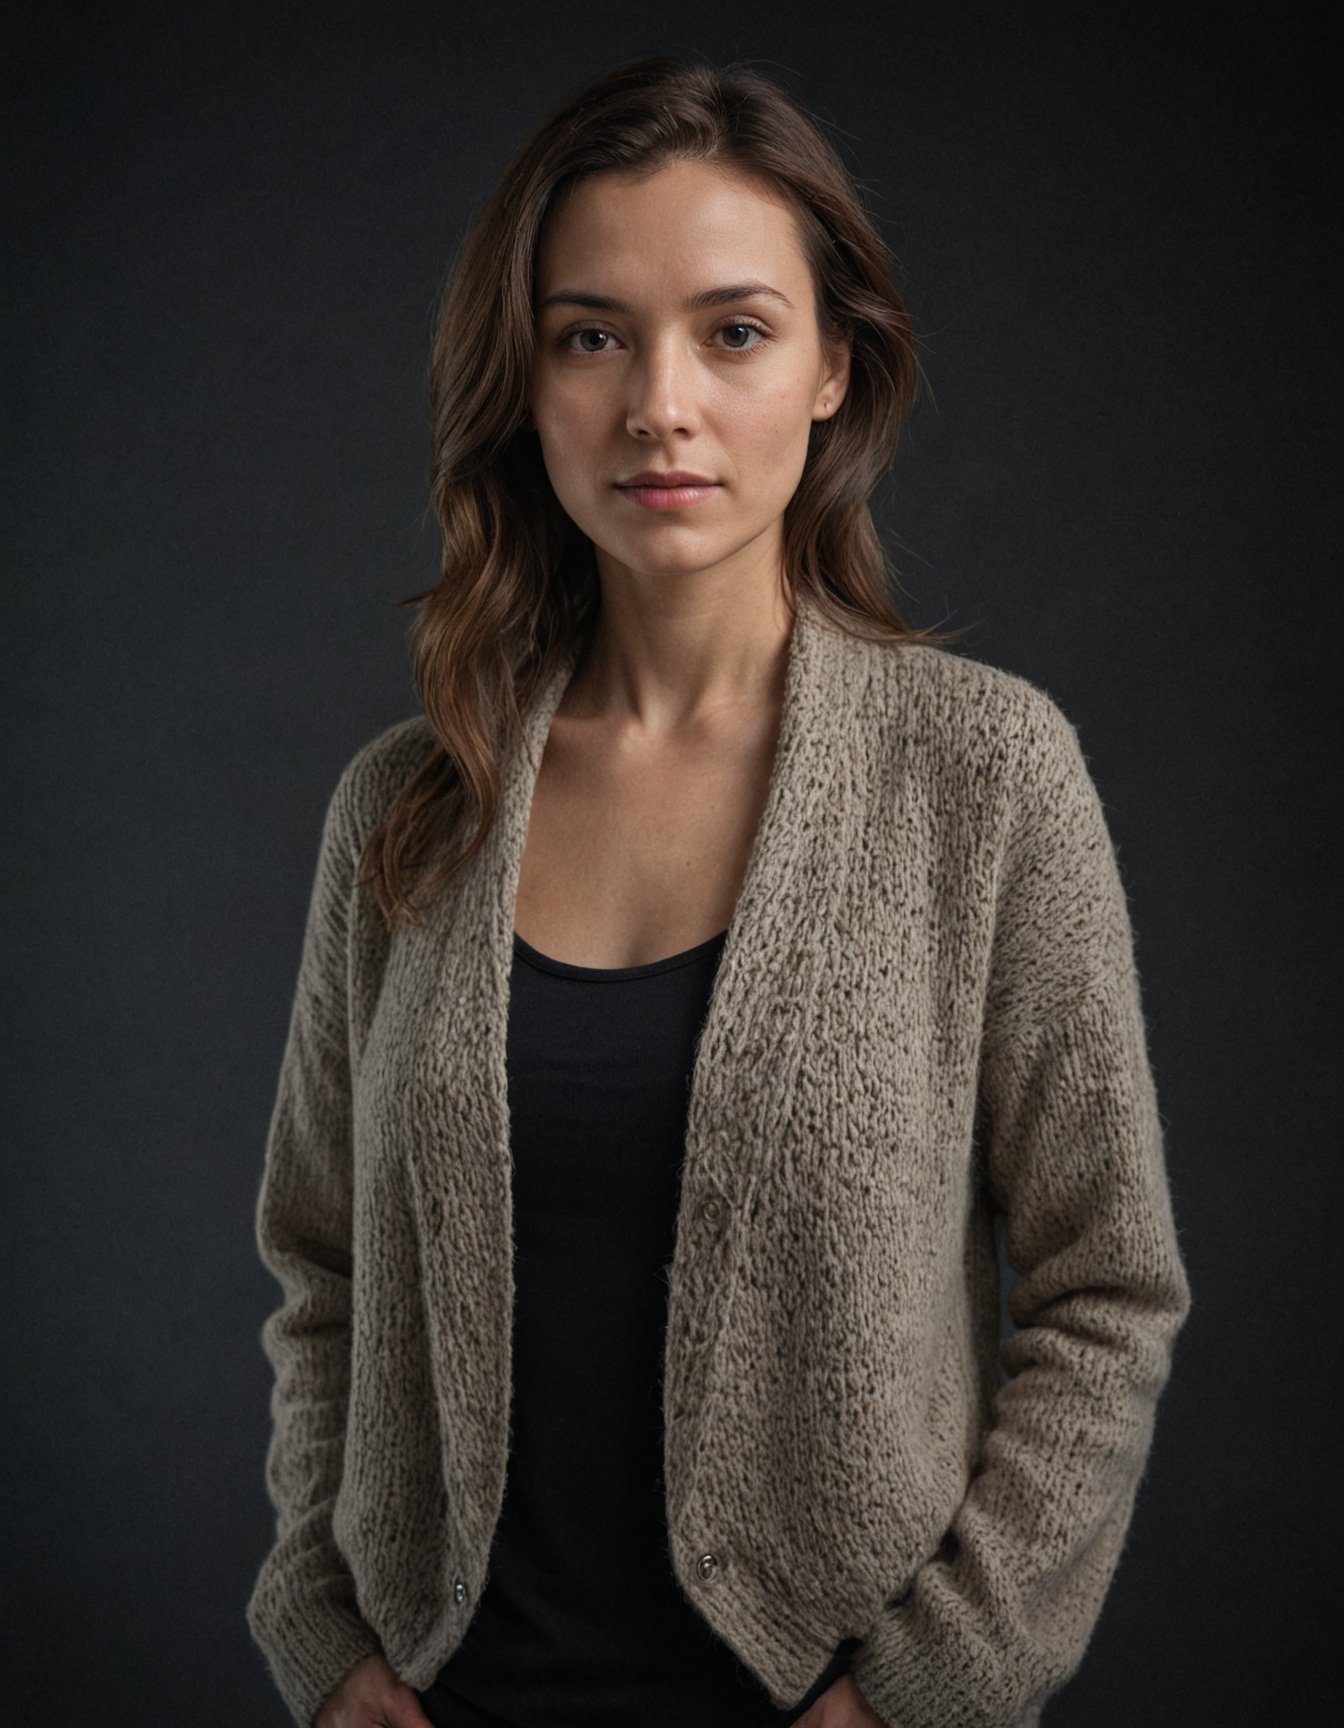 centered, portrait photo of 35 y.o woman, open jacket, sweater, natural skin, dark shot